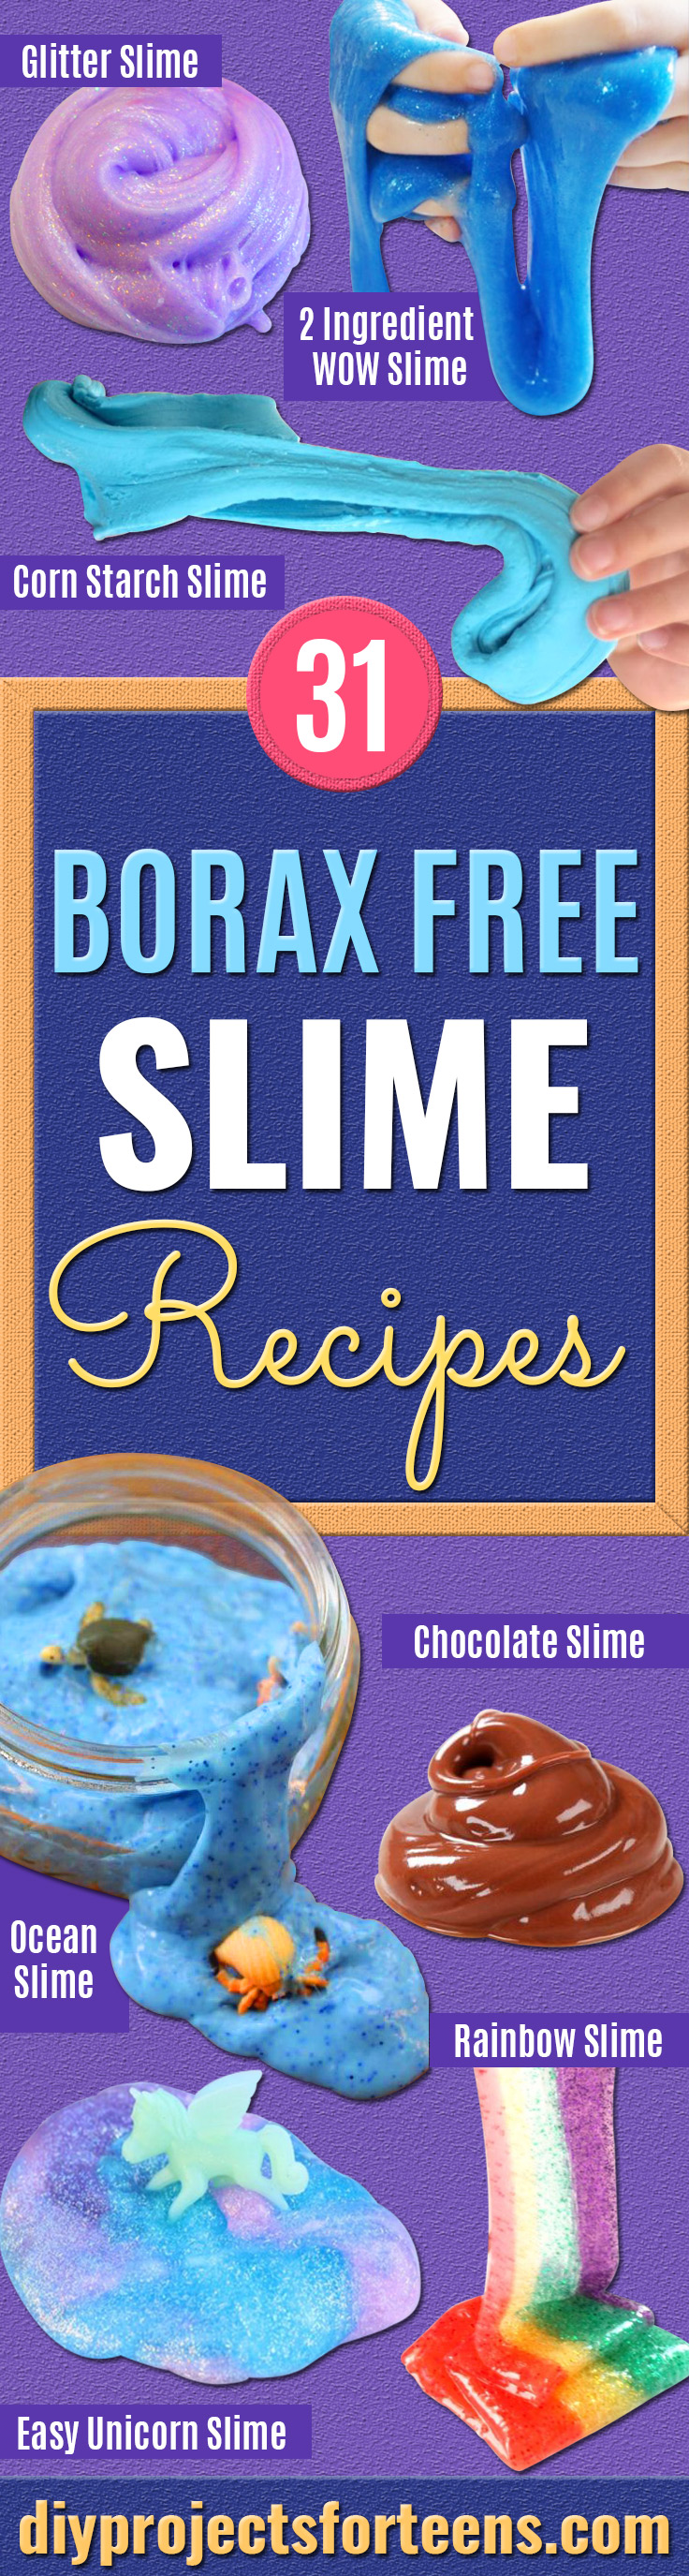 Borax Free Slime Recipes - Safe Slimes To Make Without Glue - How To Make Fluffy Slime With Shaving Cream - Easy 3 Ingredients Glitter Slime, Clear, Galaxy, Best DIY Slime Tutorials With Step by Step Instructions -Homemade Slime Recipe Ideas - Cool Step by Step Tutorials for Making Slime at Home - How to Make DIY Borax Free Slimes and Slime Recipe Ideas